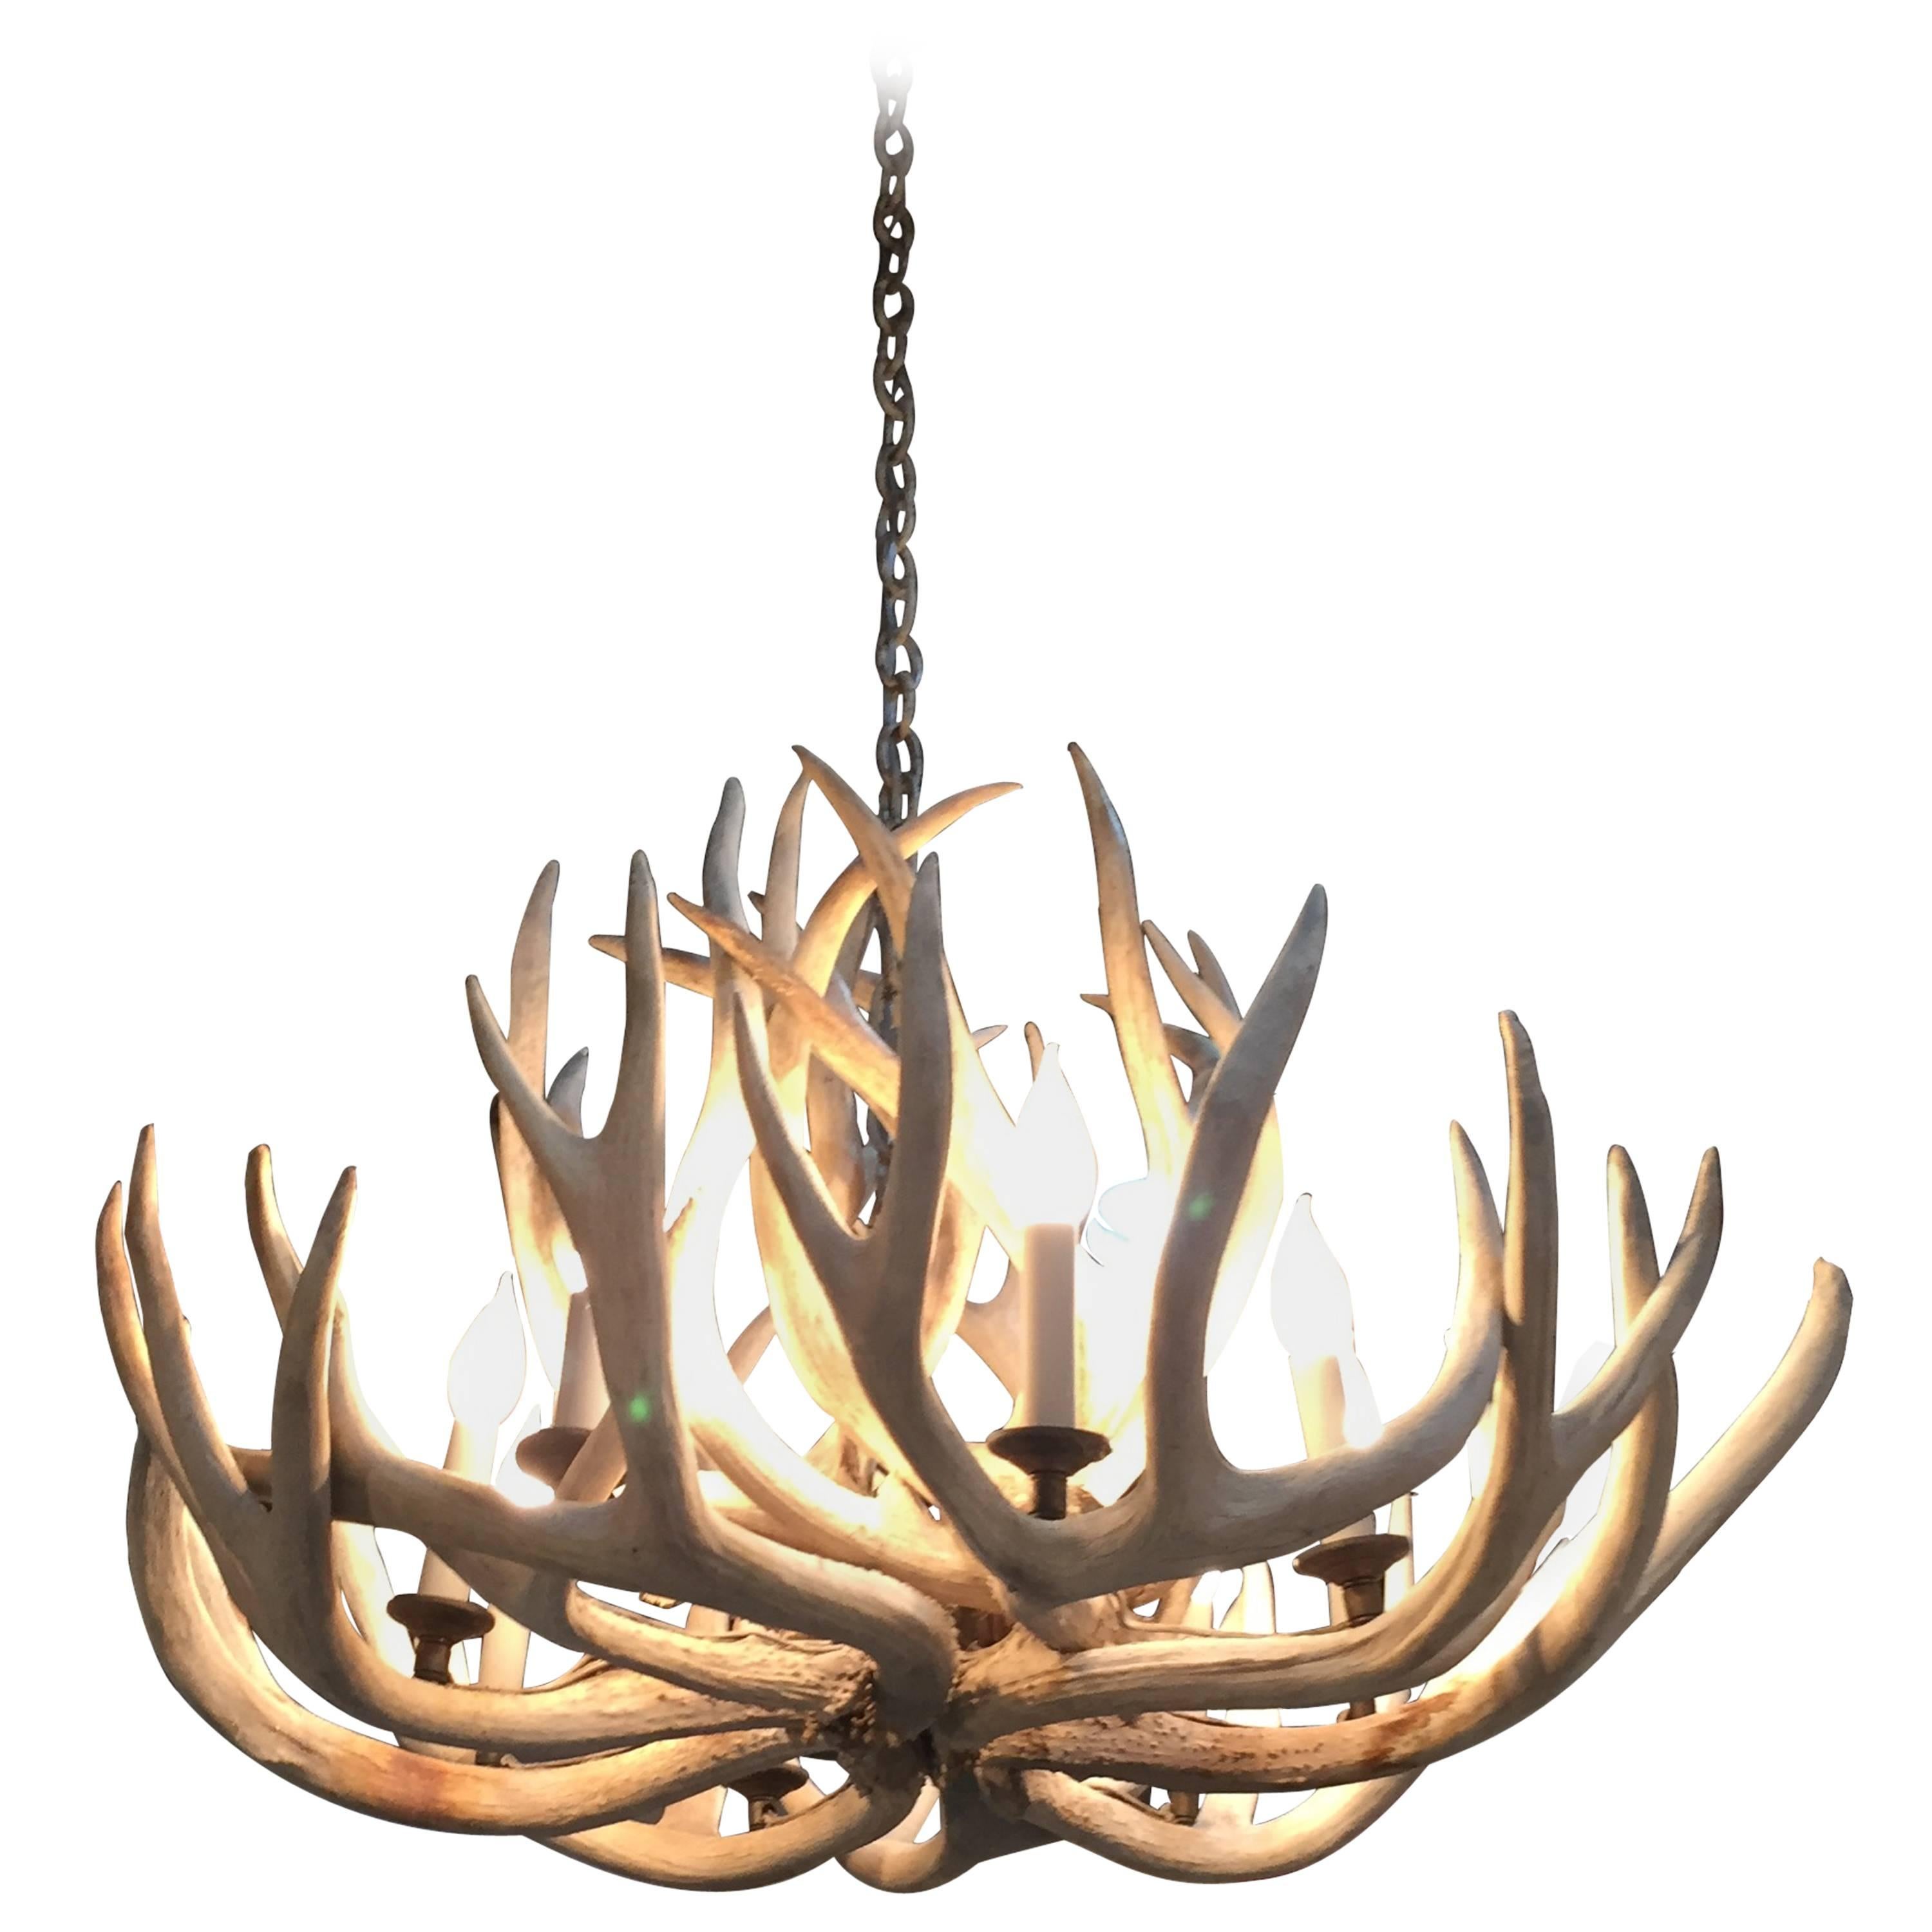 Very Impressive Authentic Antique Bleached Antler Chandelier